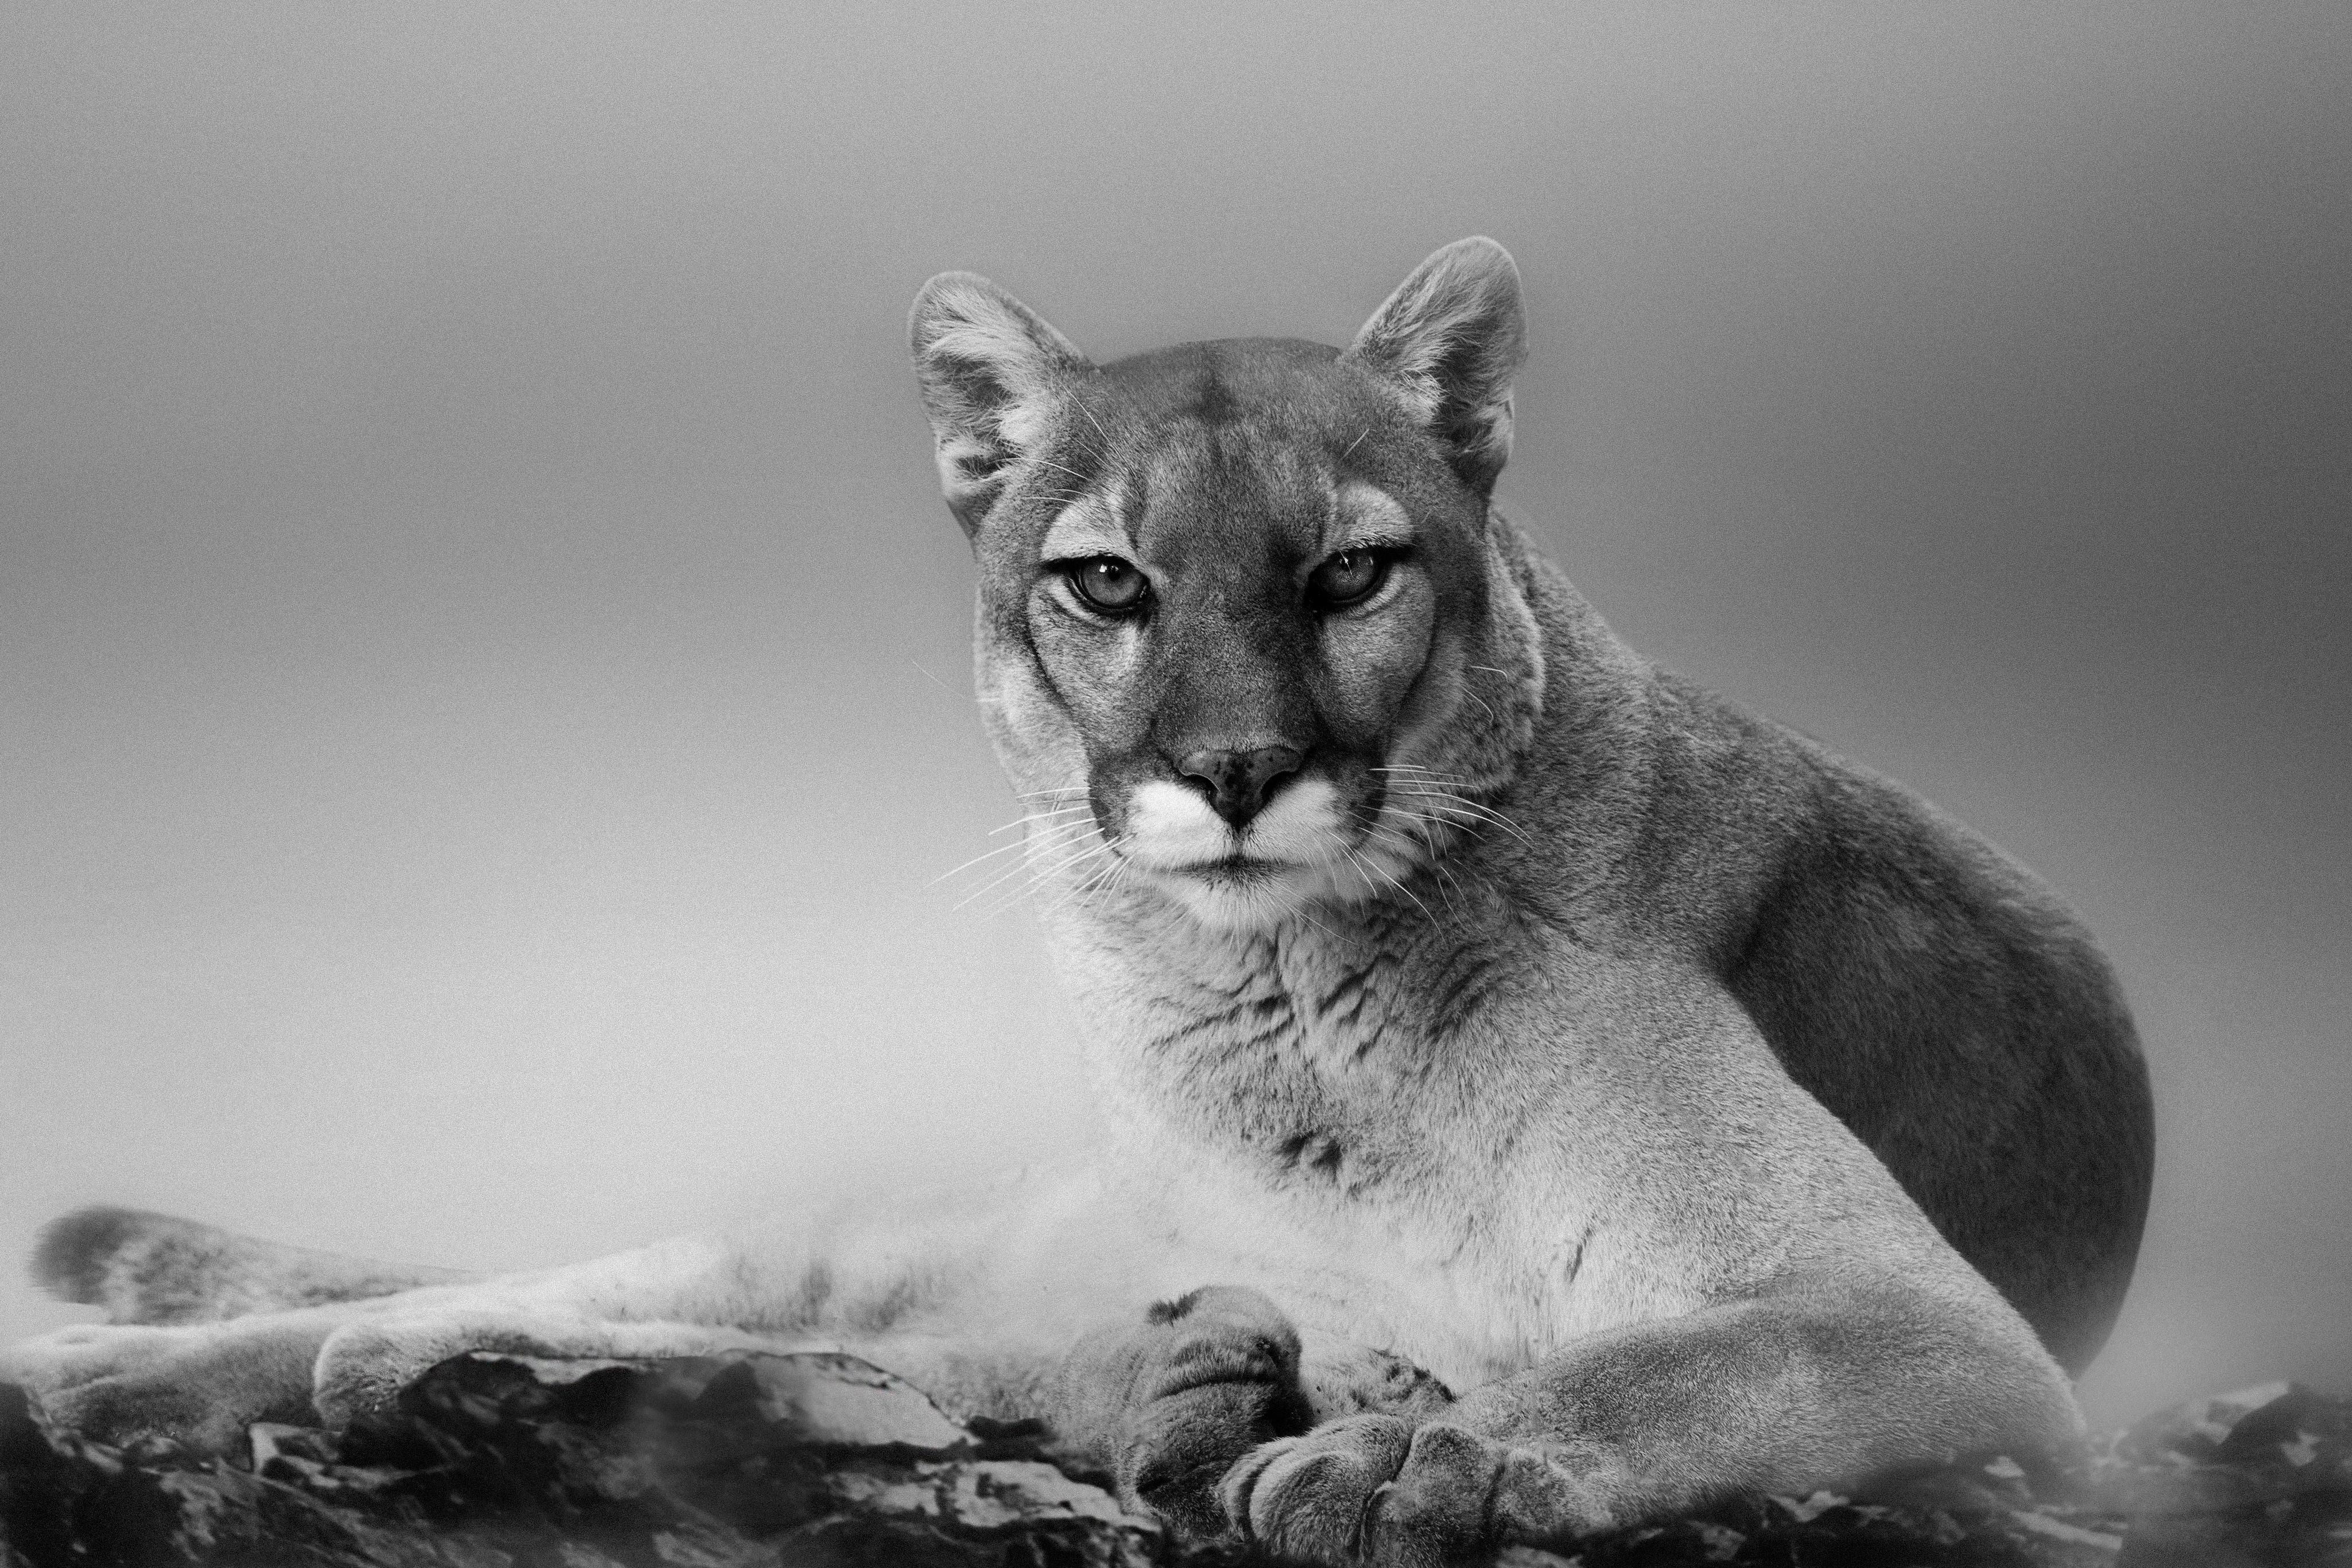 Shane Russeck Black and White Photograph - Cougar Print 40x60 - Fine Art Photography of Mountain Lion, Cougar